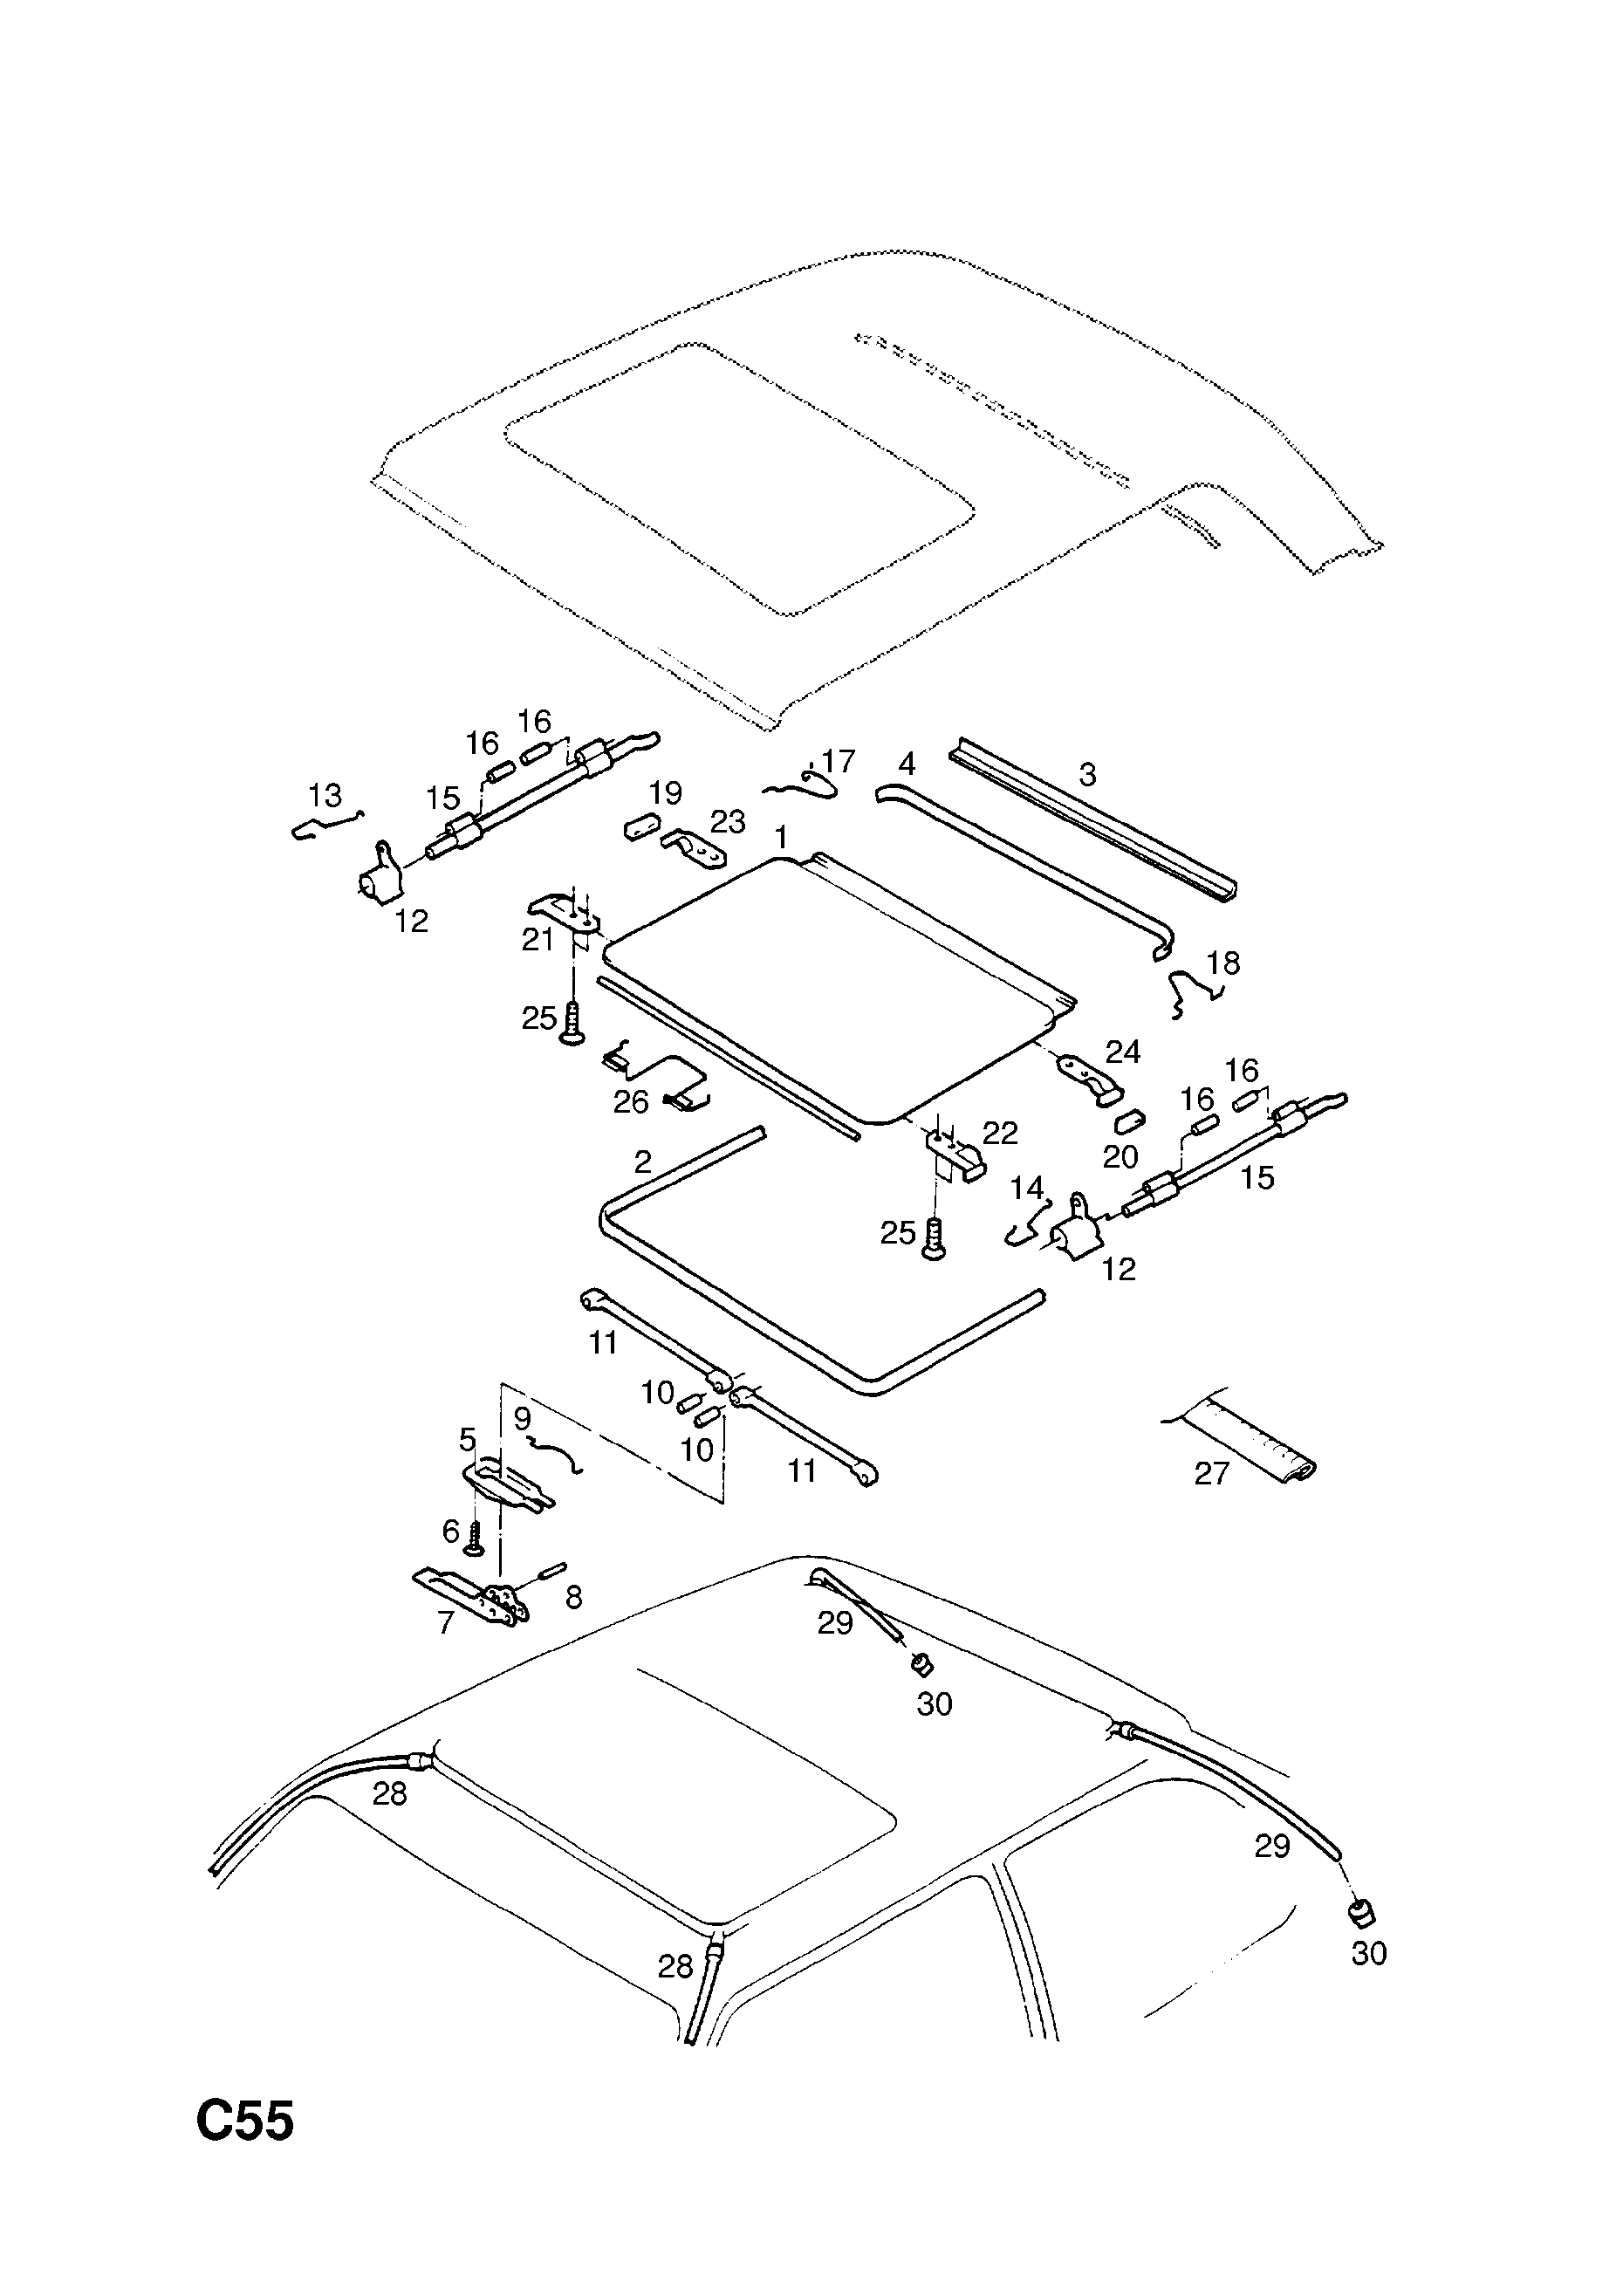 SUN ROOF (CONTD.) <small><i>[HATCH,SALOON (81,84,86,87,89) (FOR SLIDING STEEL SUN ROOF)]</i></small>